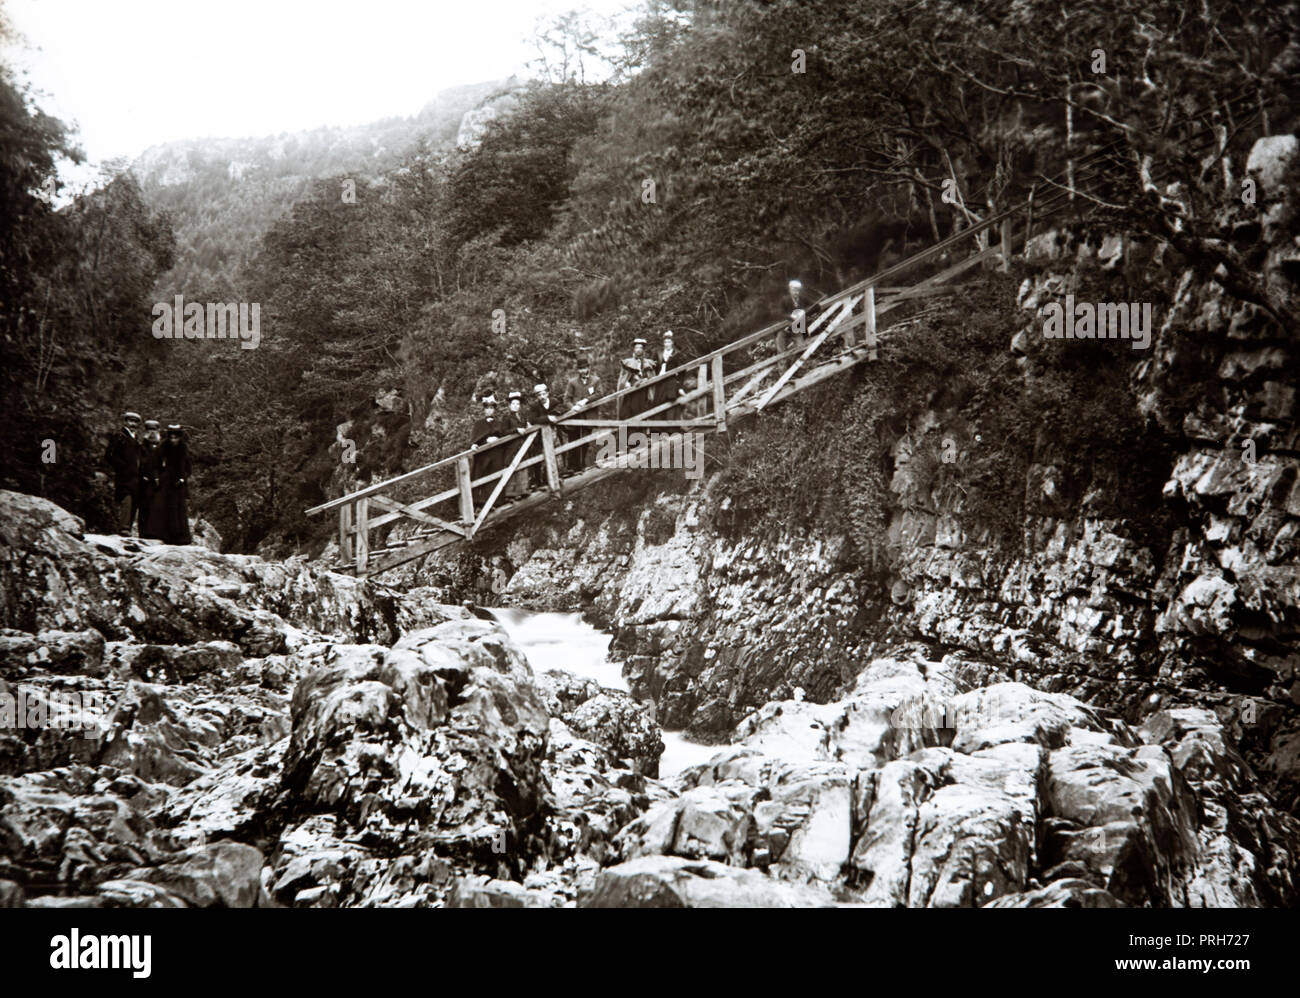 Early twentieth century photograph showing the original Miners Bridge crossing the River LLugwy in Betws Y Coed in the Snowdonia National park in North Wales. Stock Photo